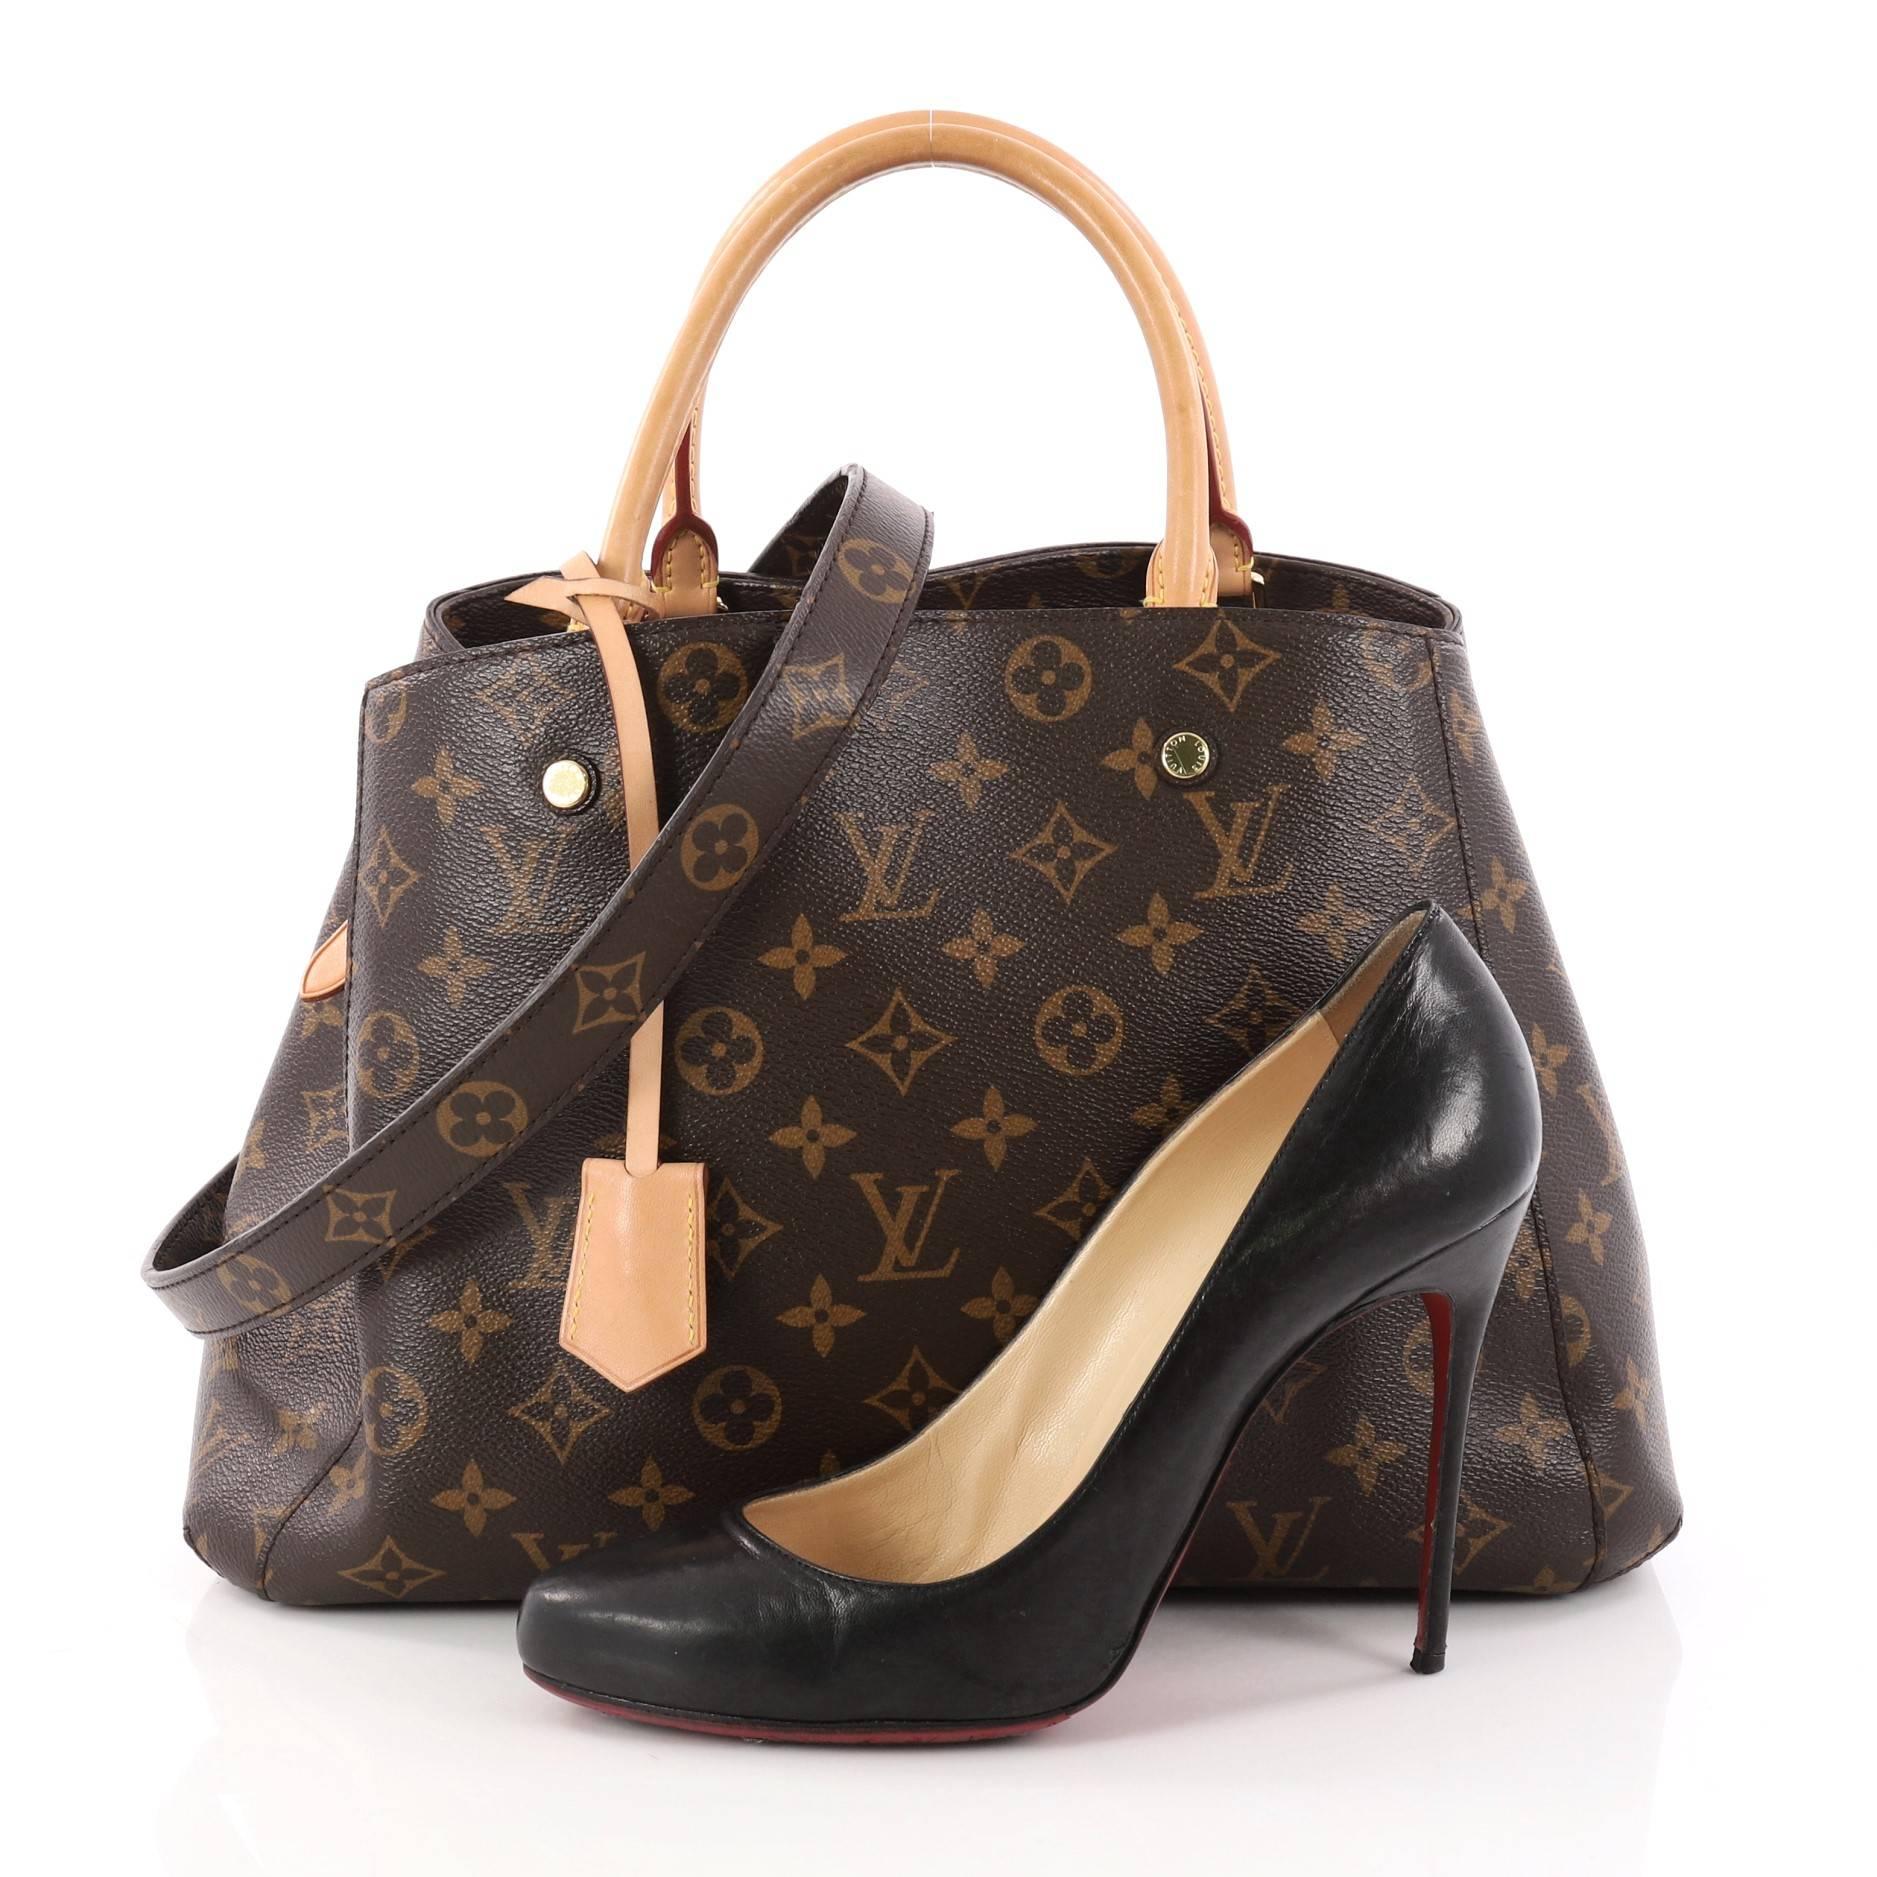 This authentic Louis Vuitton Montaigne Handbag Monogram Canvas MM named after the famed Parisian location is a sophisticated bag. Crafted from the iconic Louis Vuitton's brown monogram coated canvas, this tote features dual-rolled vachetta leather